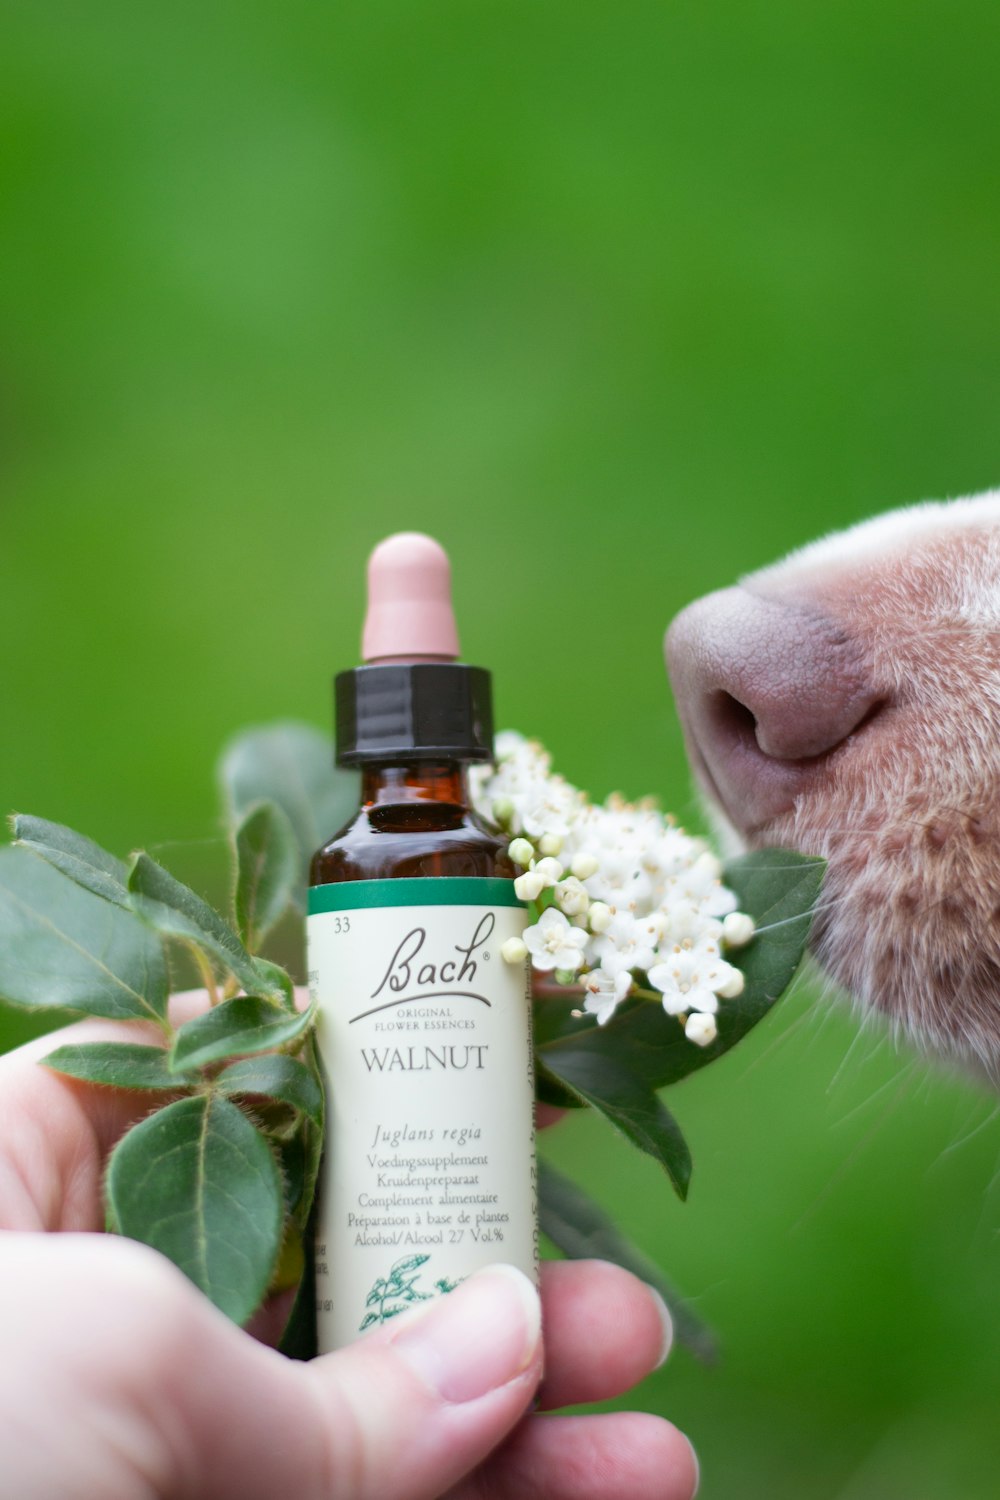 a dog smelling a bottle of bach's walnut essential oil